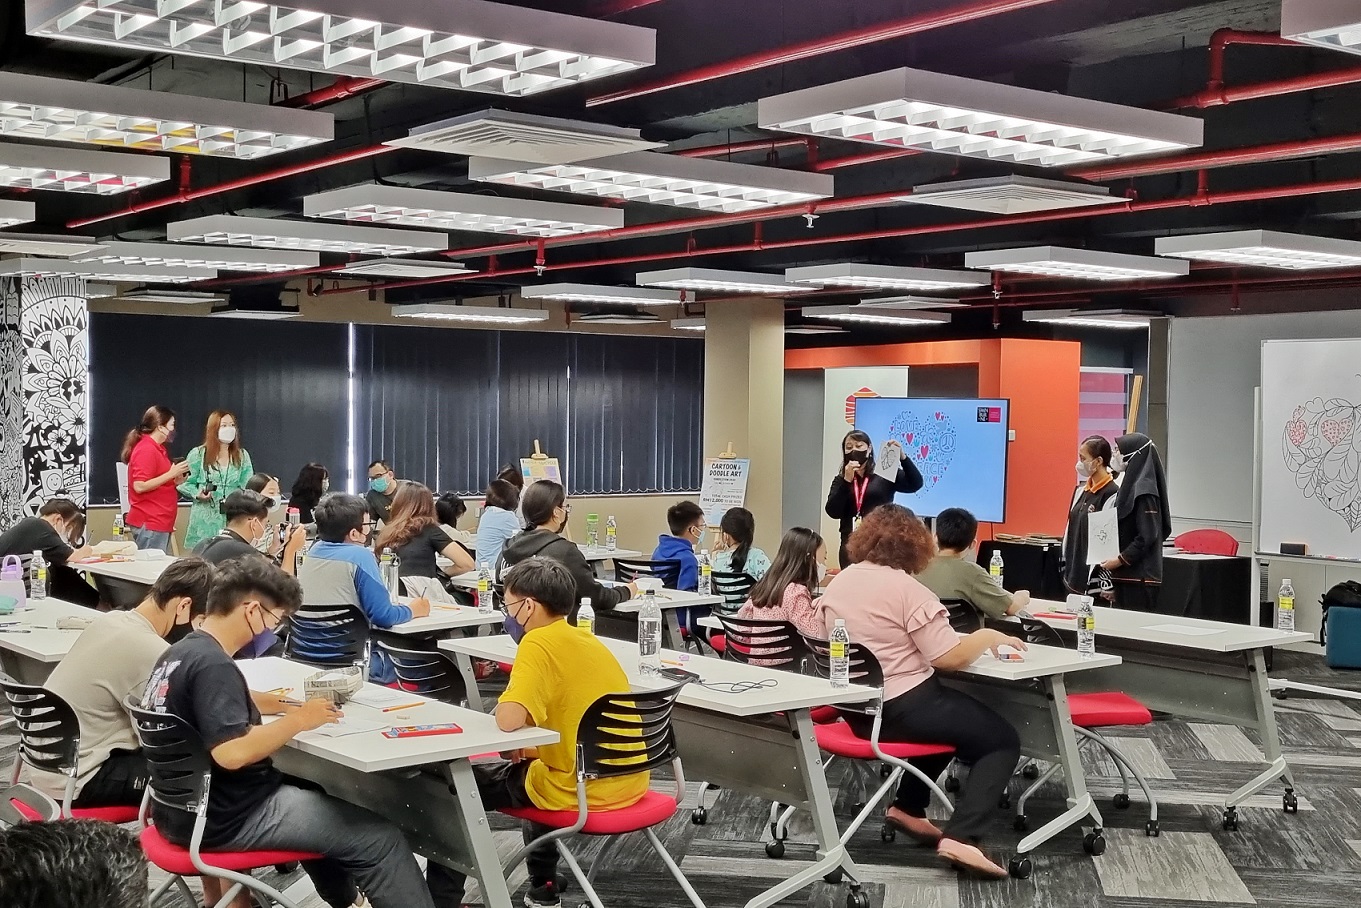 Students taking part in the face-to-face doodle art workshop held at The Hive Design Studio, Swinburne Sarawak.